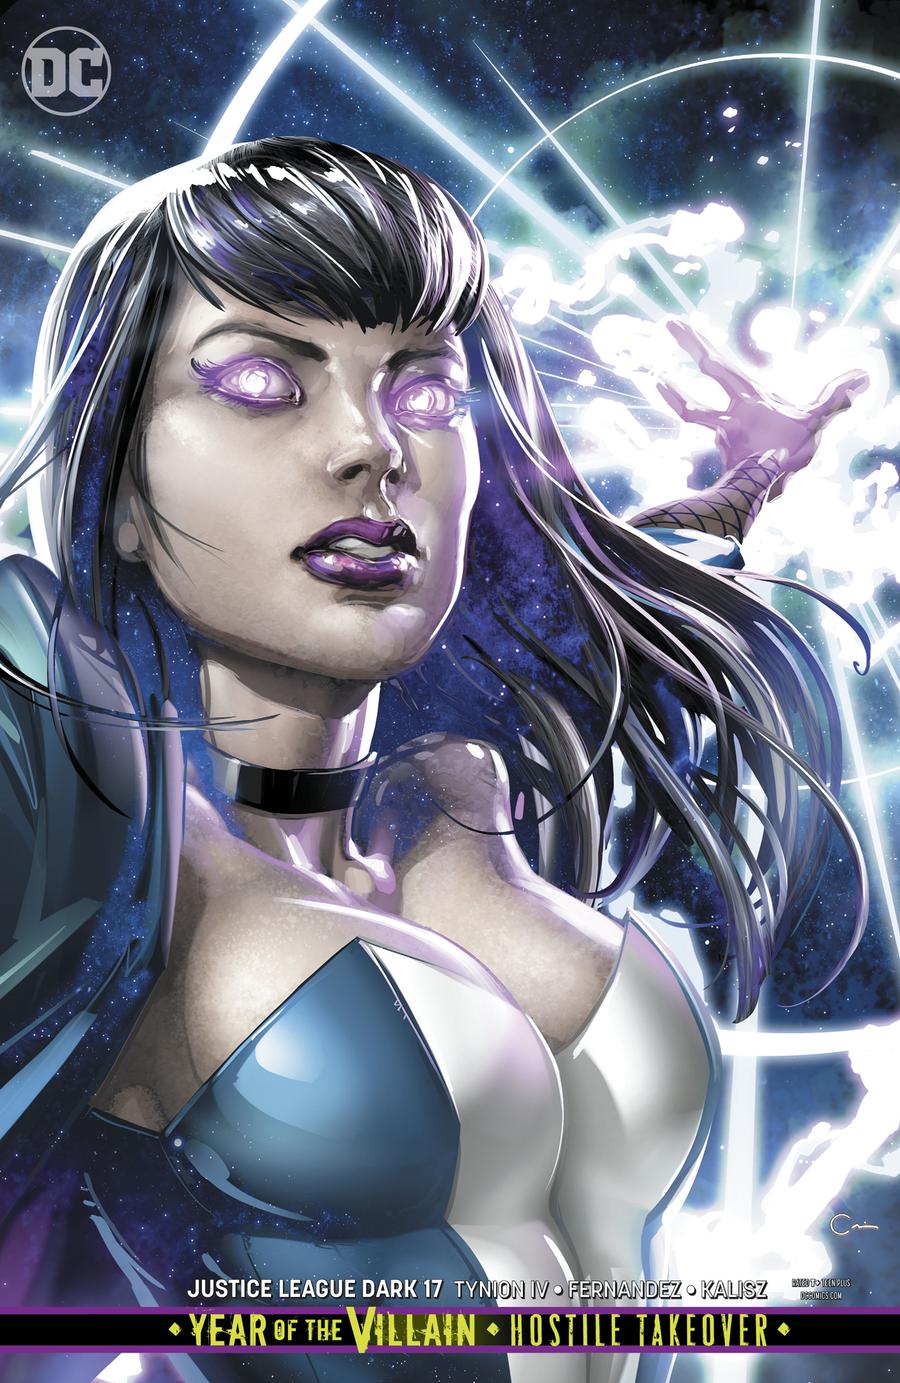 Justice League Dark Vol 2 #17 Cover B Variant Clayton Crain Cover (Year Of The Villain Hostile Takeover Tie-In)